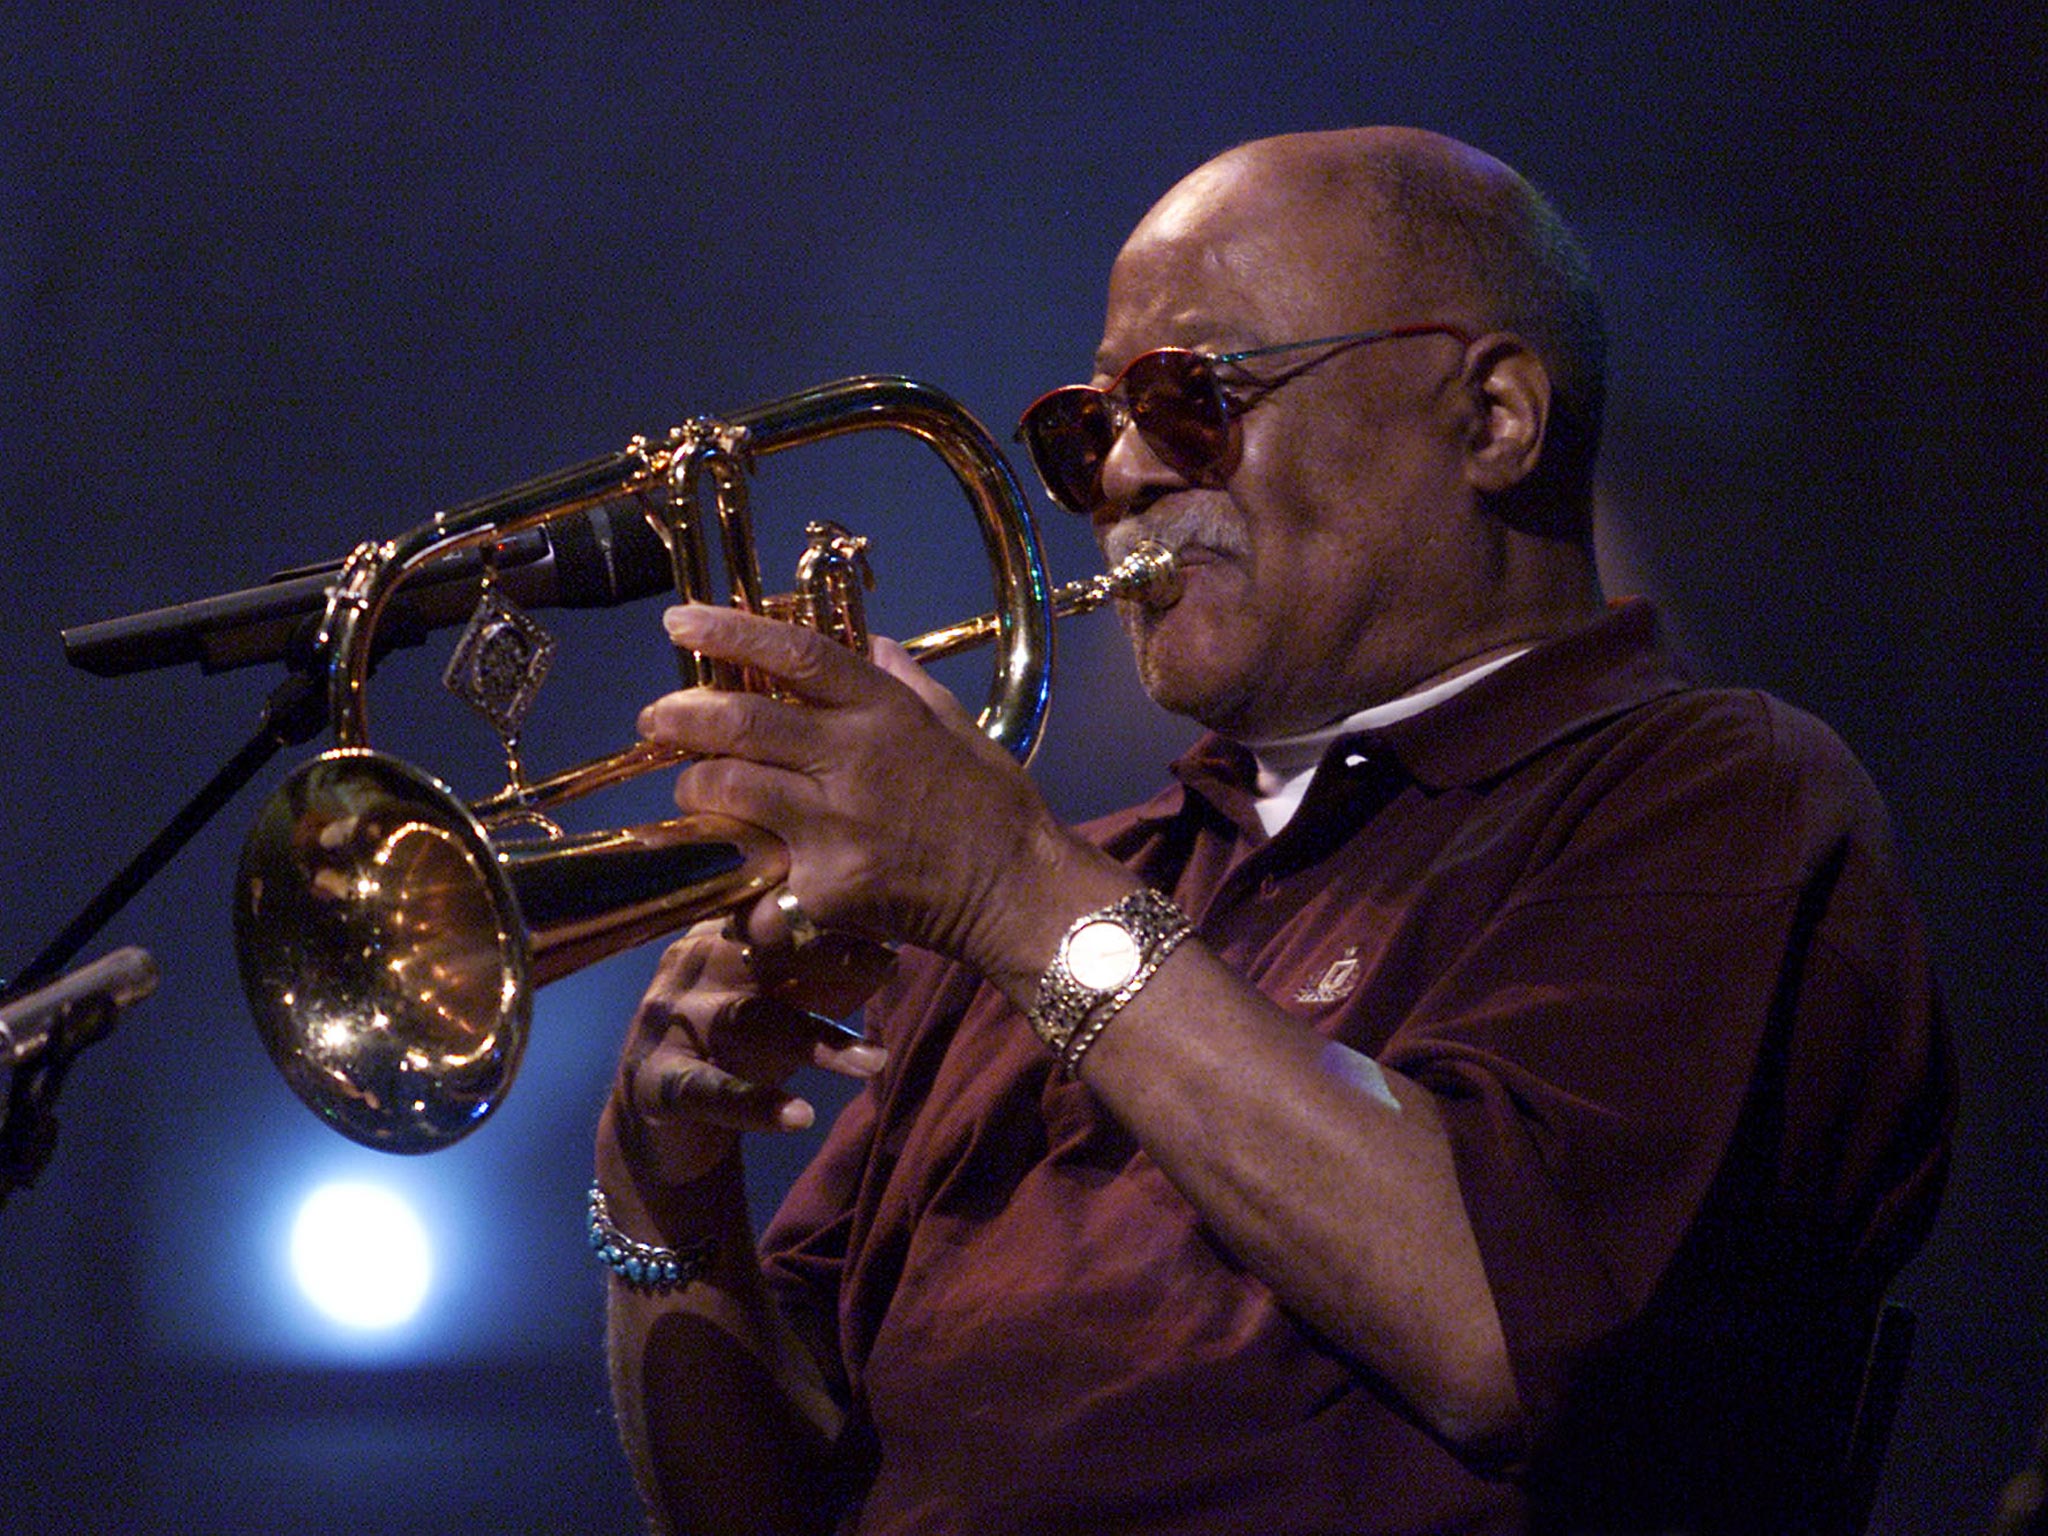 Jazz trumpeter Clark Terry rehearsing before a performance in 2001